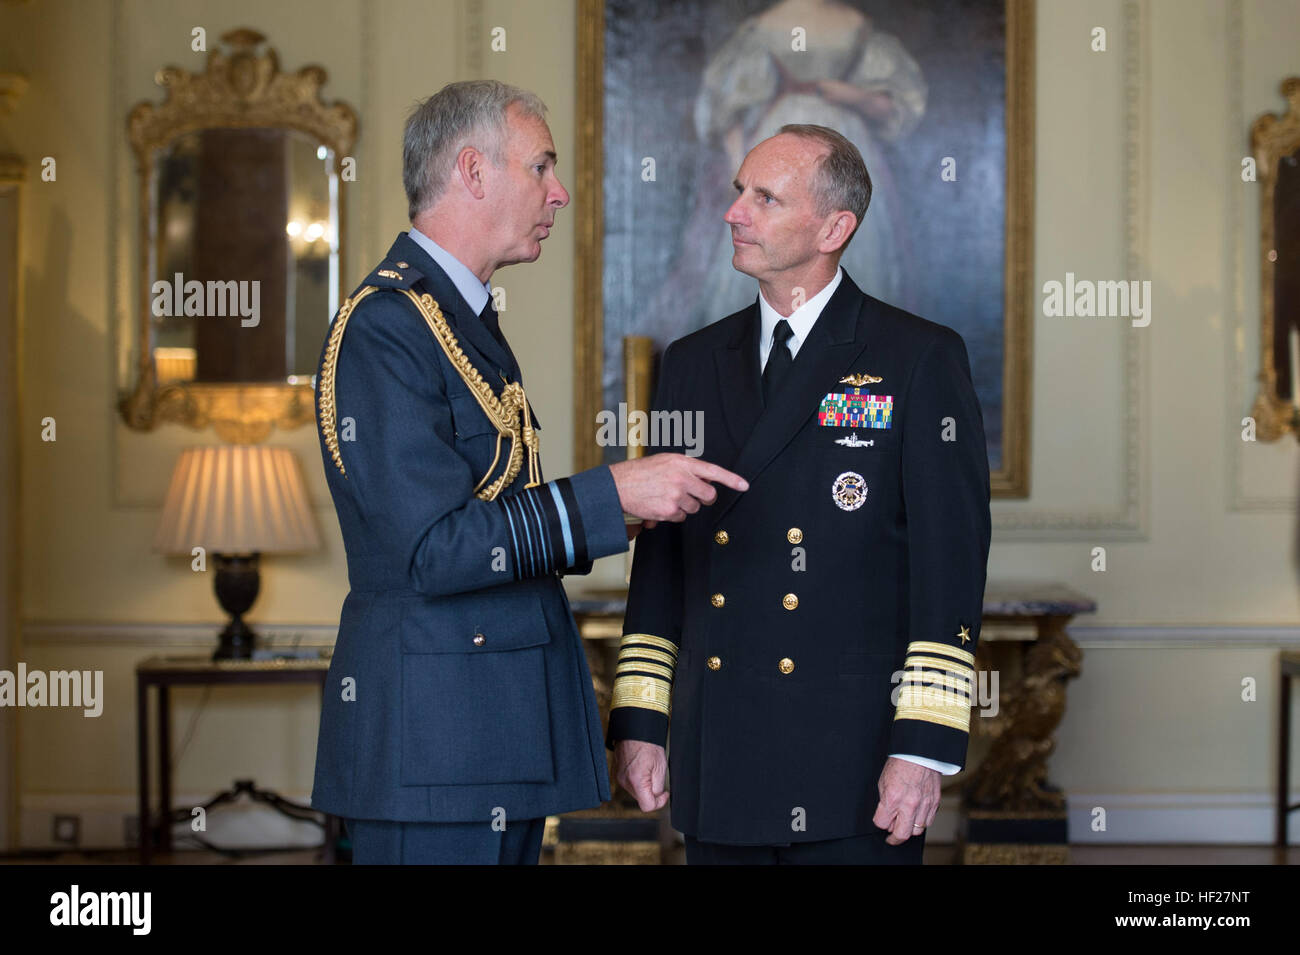 Chief of Naval Operations U.S. Navy Adm. Jonathan Greenert, right, talks with U.K. Chief of the Air Staff Air Chief Marshal Sir Andrew Pulford before a meeting with U.K. Prime Minister David Cameron June 10, 2014, in London. The meeting was part of a defense chiefs strategic dialogue with the U.S. Joint Chiefs of Staff and their British counterparts. (DoD photo by Mass Communication Specialist 1st Class Daniel Hinton, U.S. Navy/Released) US, UK Joint Chiefs of Staff talk collaboration 140610-D-KC128-393 Stock Photo